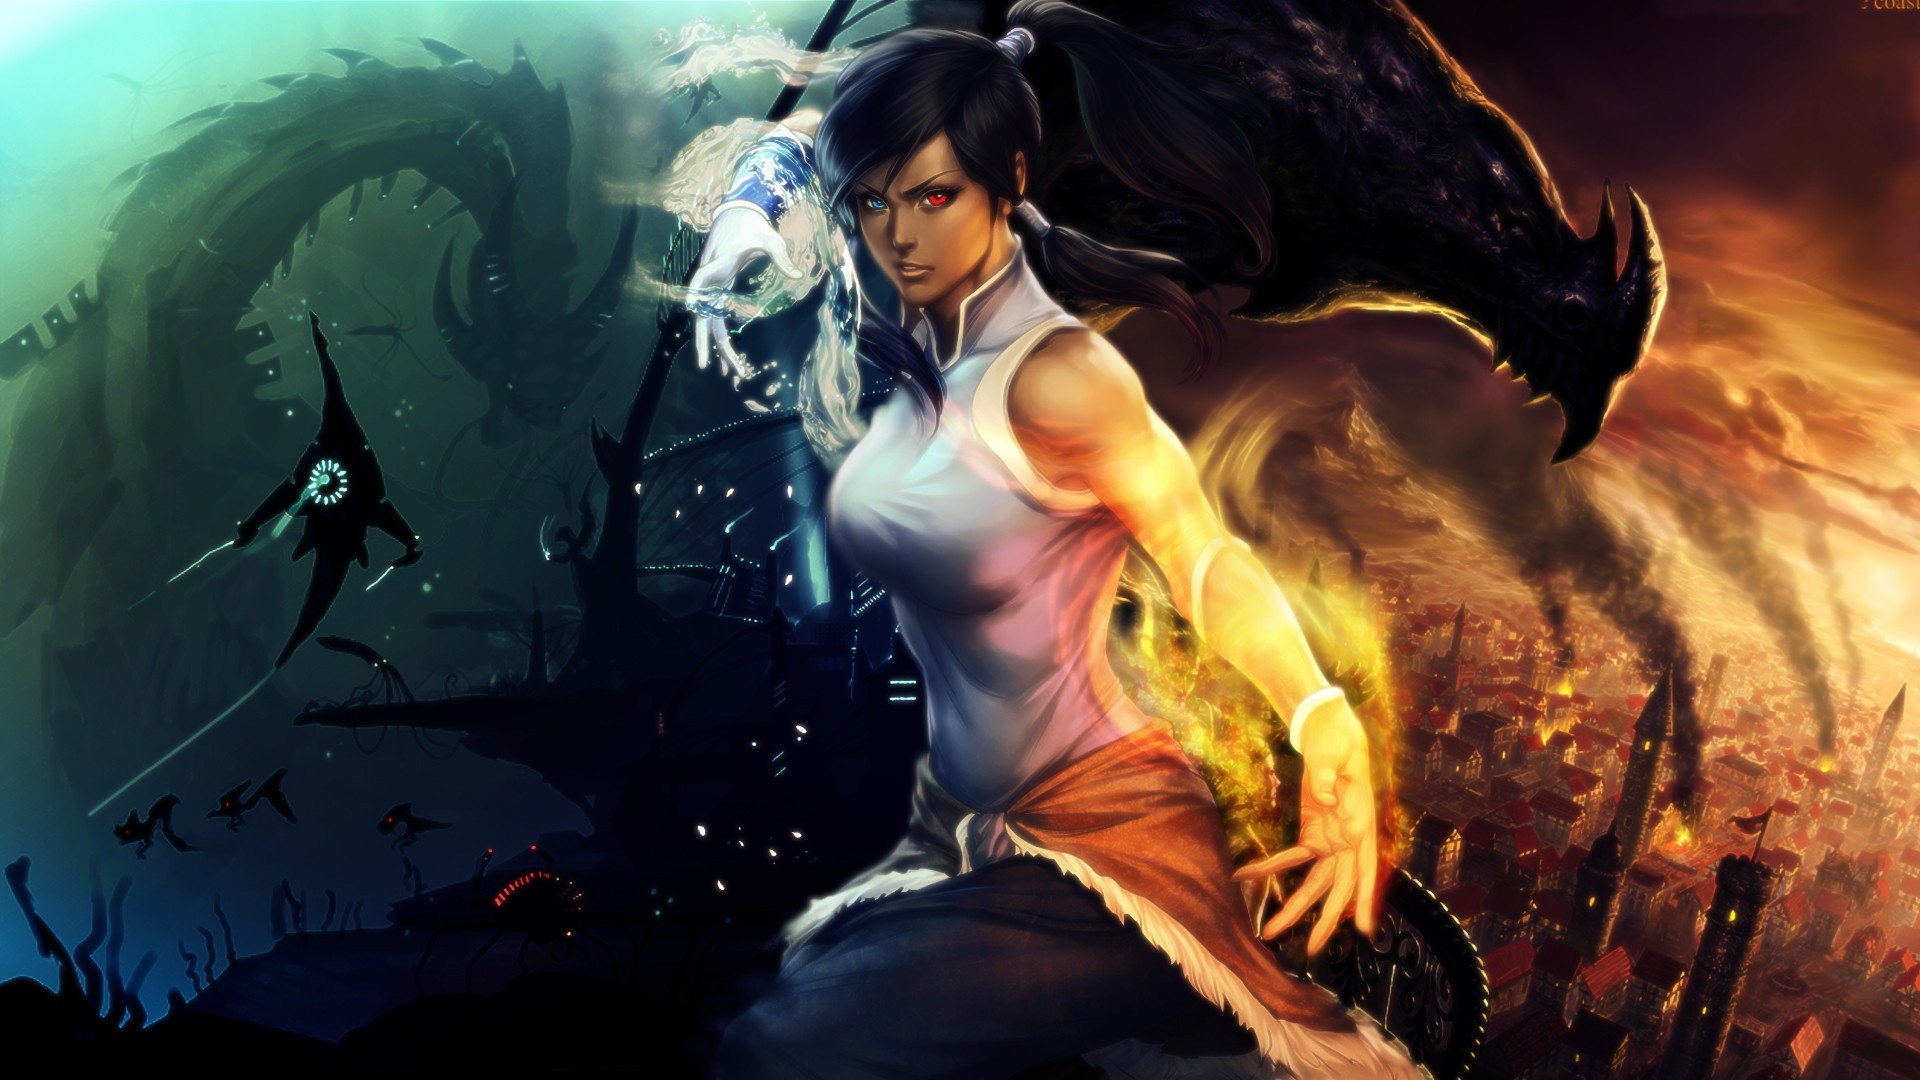 1920x1080 92 Avatar: The Legend Of Korra HD Wallpapers | Backgrounds - Wallpaper Abyss